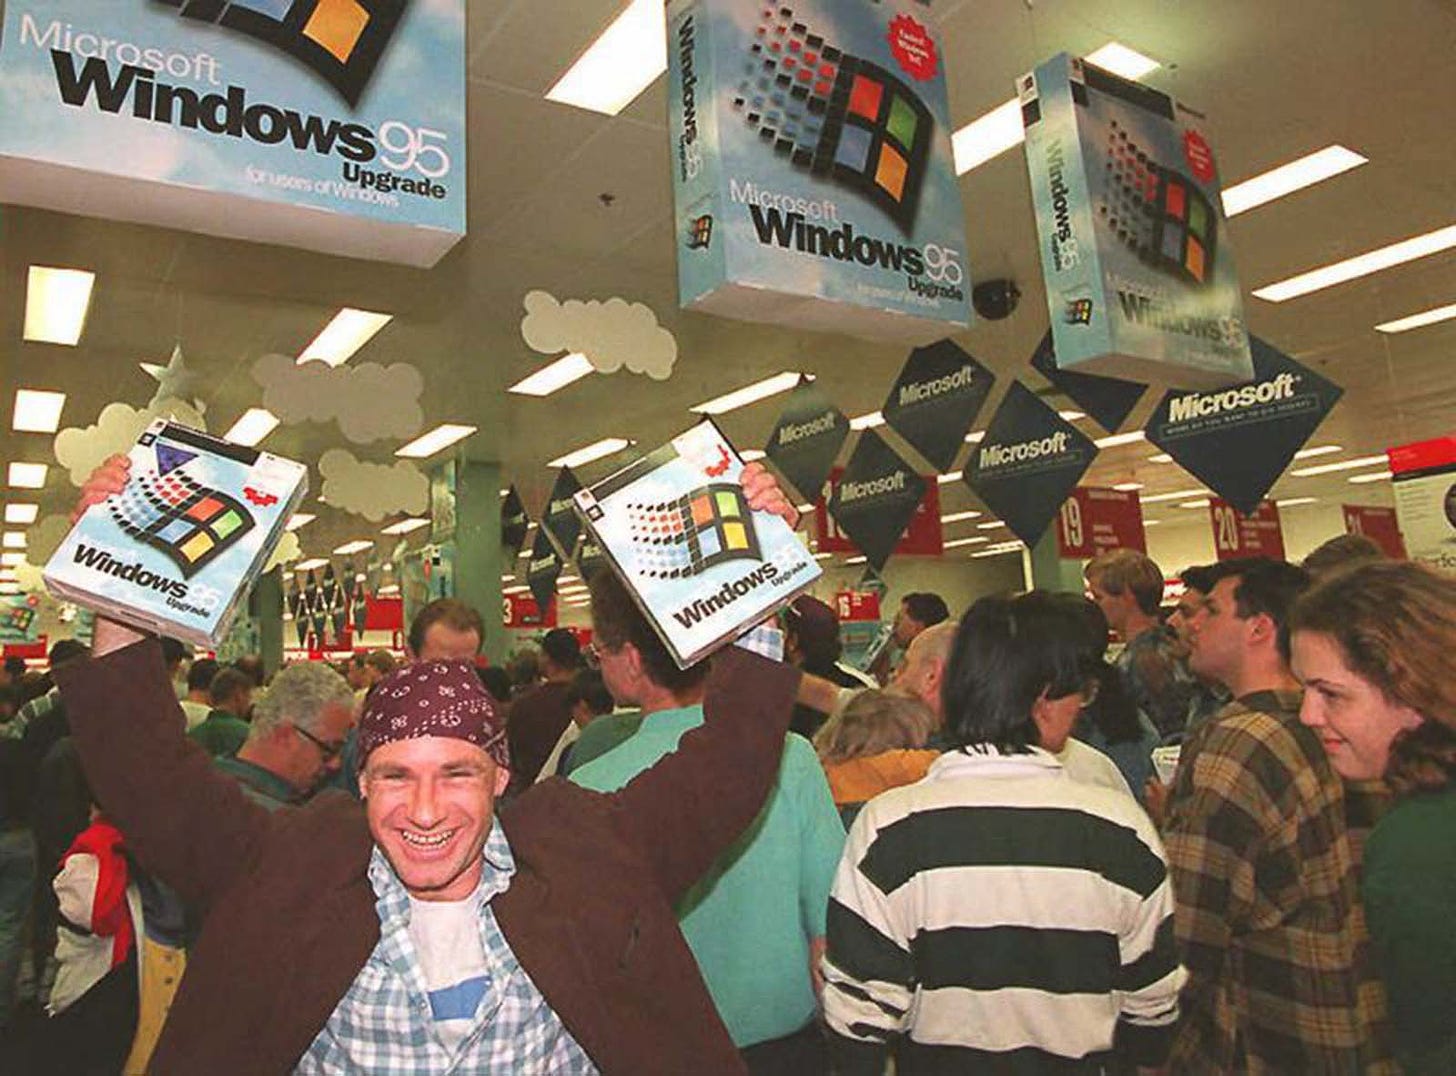 Mikol Furneaux waves two copies of Windows 95 at a midnight launch at a store in Sydney, Australia.